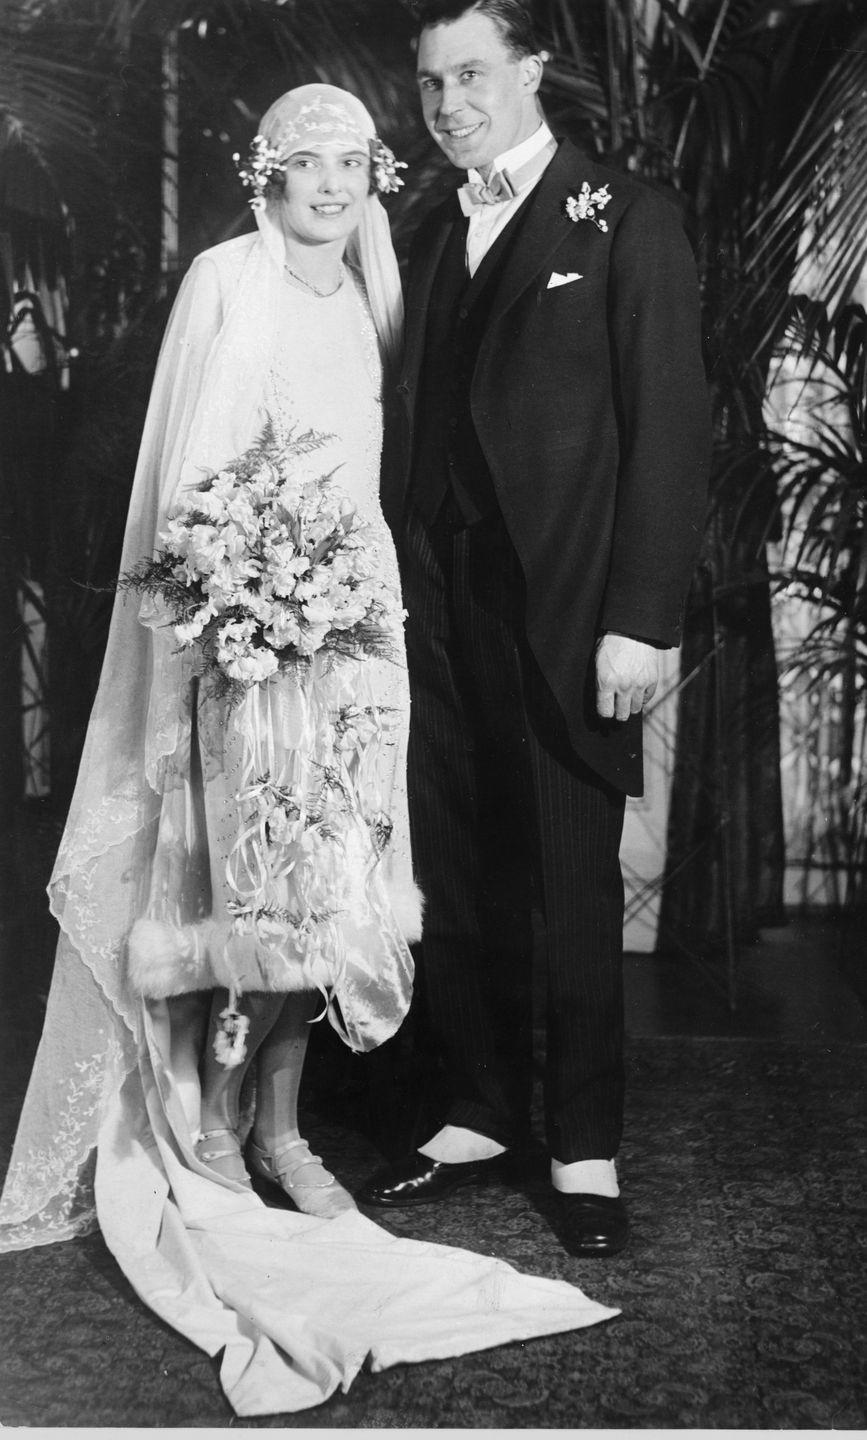 <p>Rowing champion M.K. Morris and his wife, Marguerite, pose together on their wedding day in New York.</p>